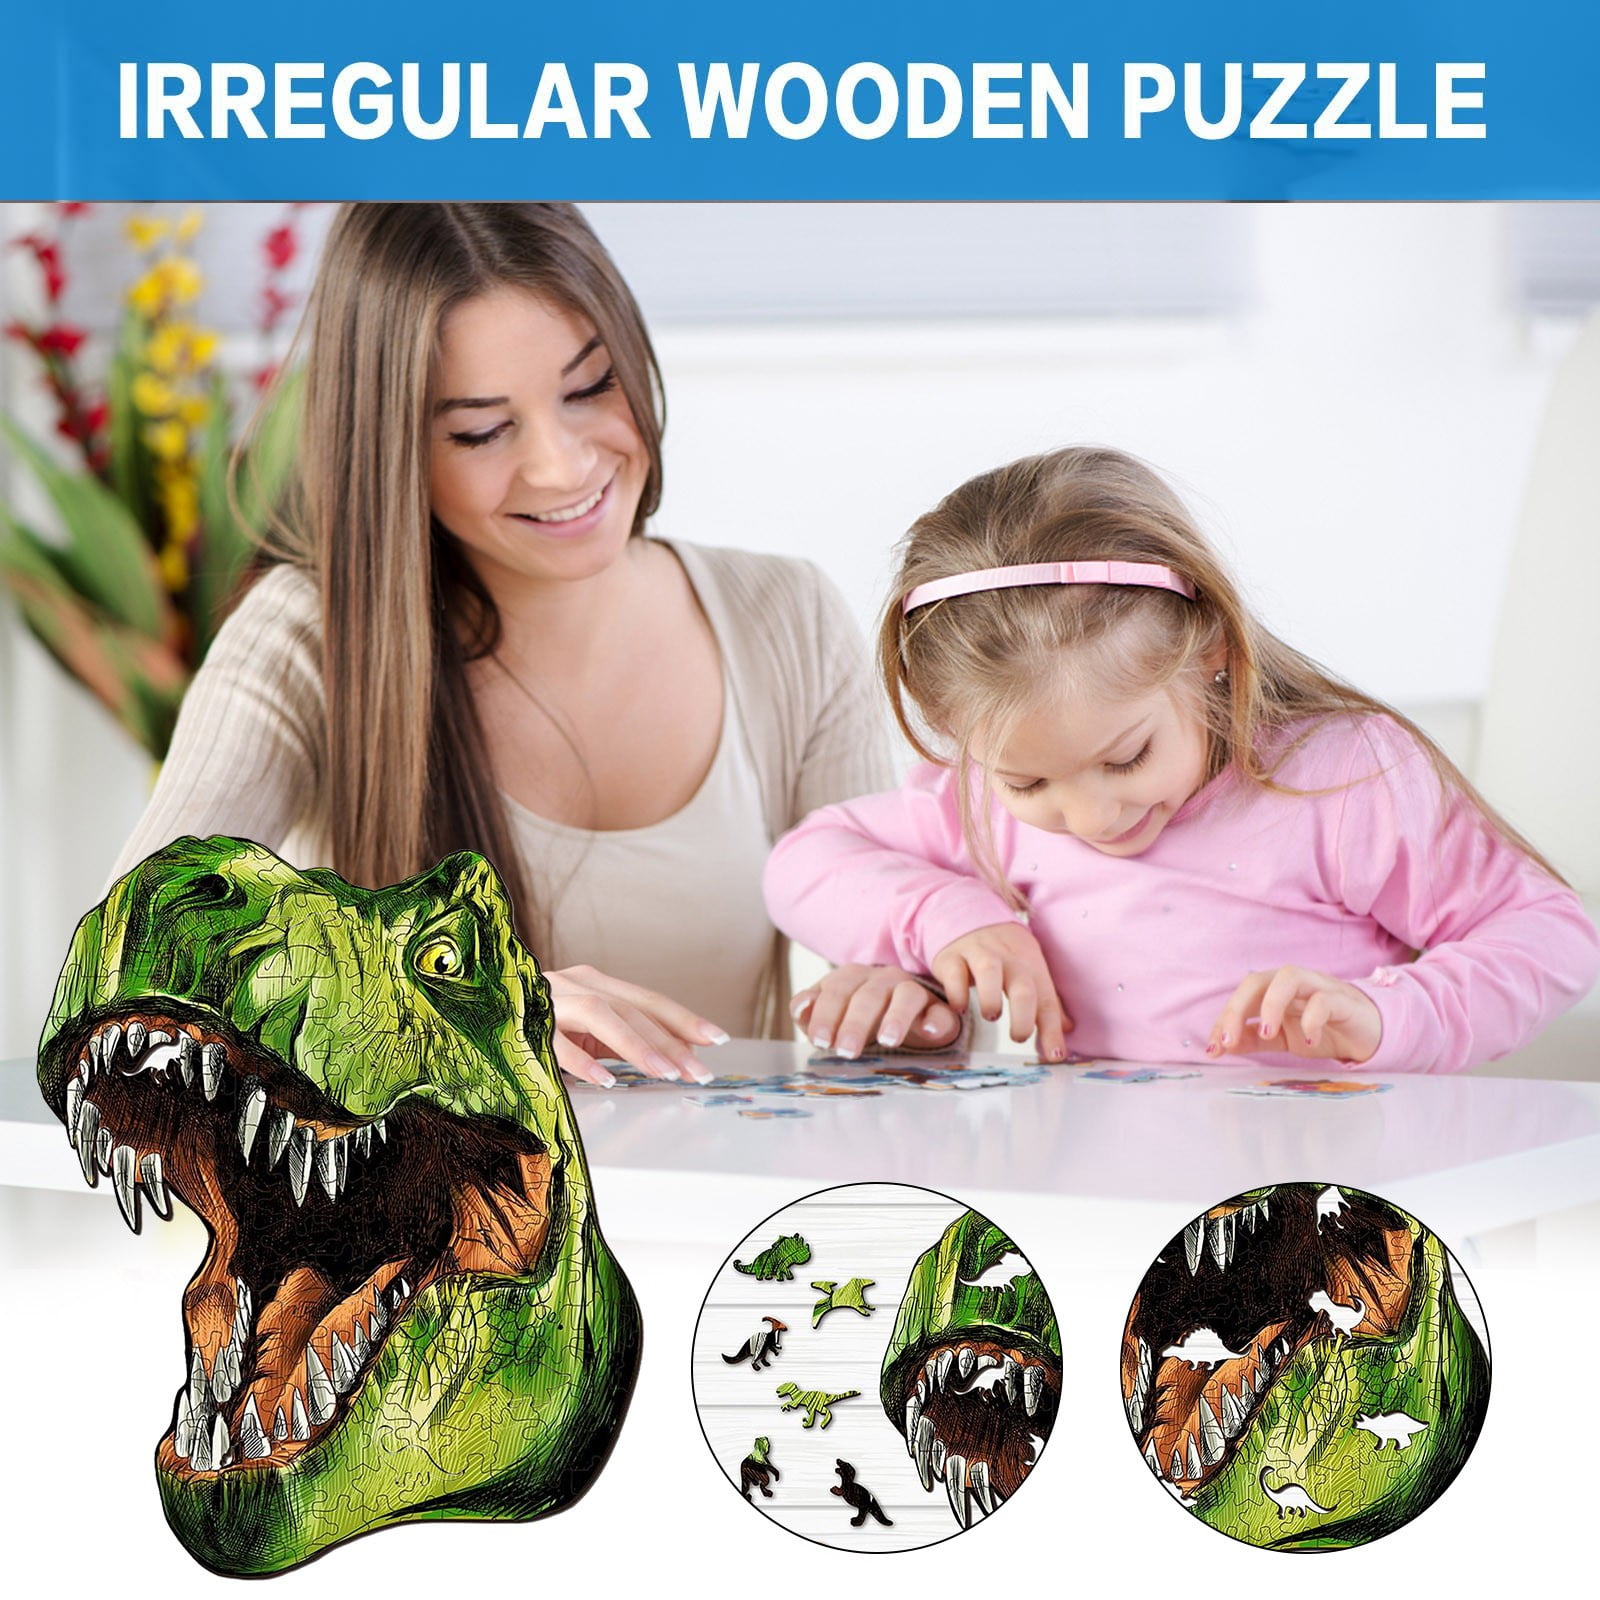 Details about   Wooden Jigsaw Puzzles Unique Animal Shape Jigsaw Pieces Creative Toy Home Decors 